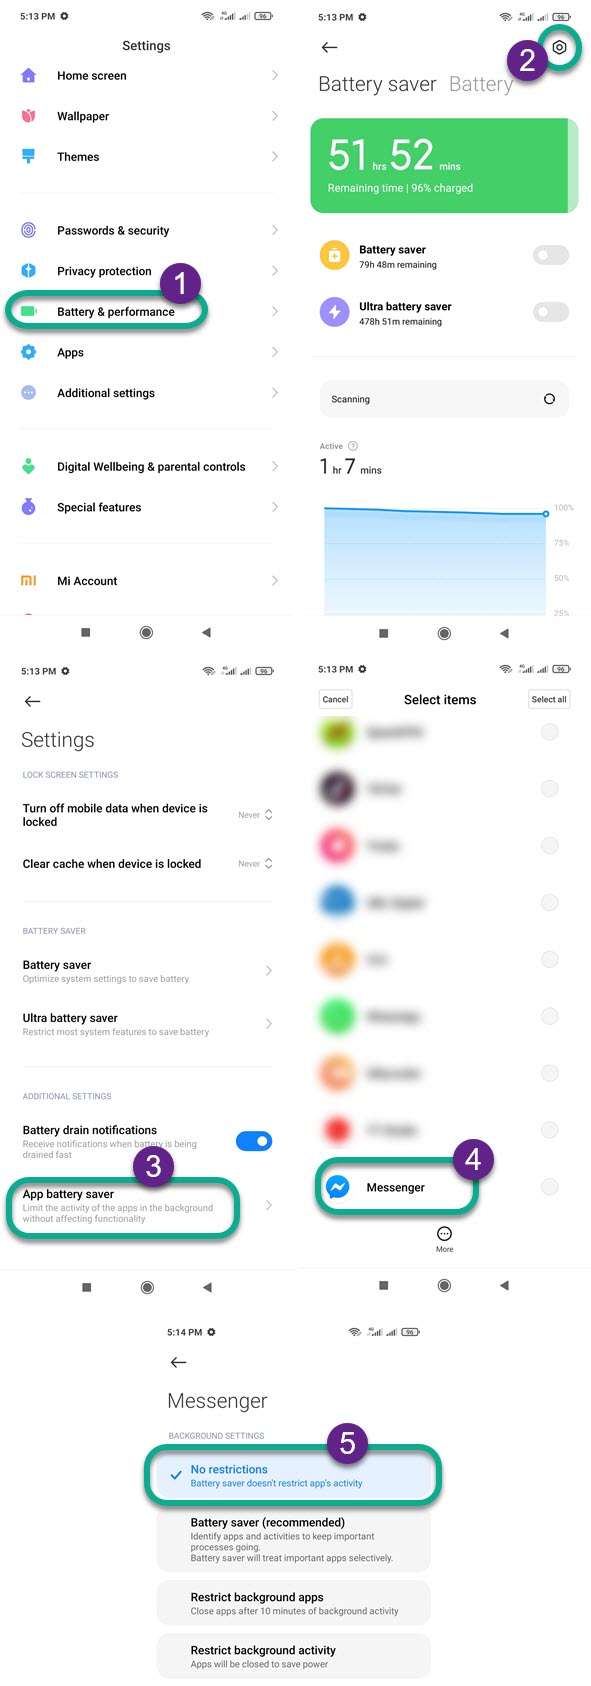 Disable Battery Restrictions for Messenger